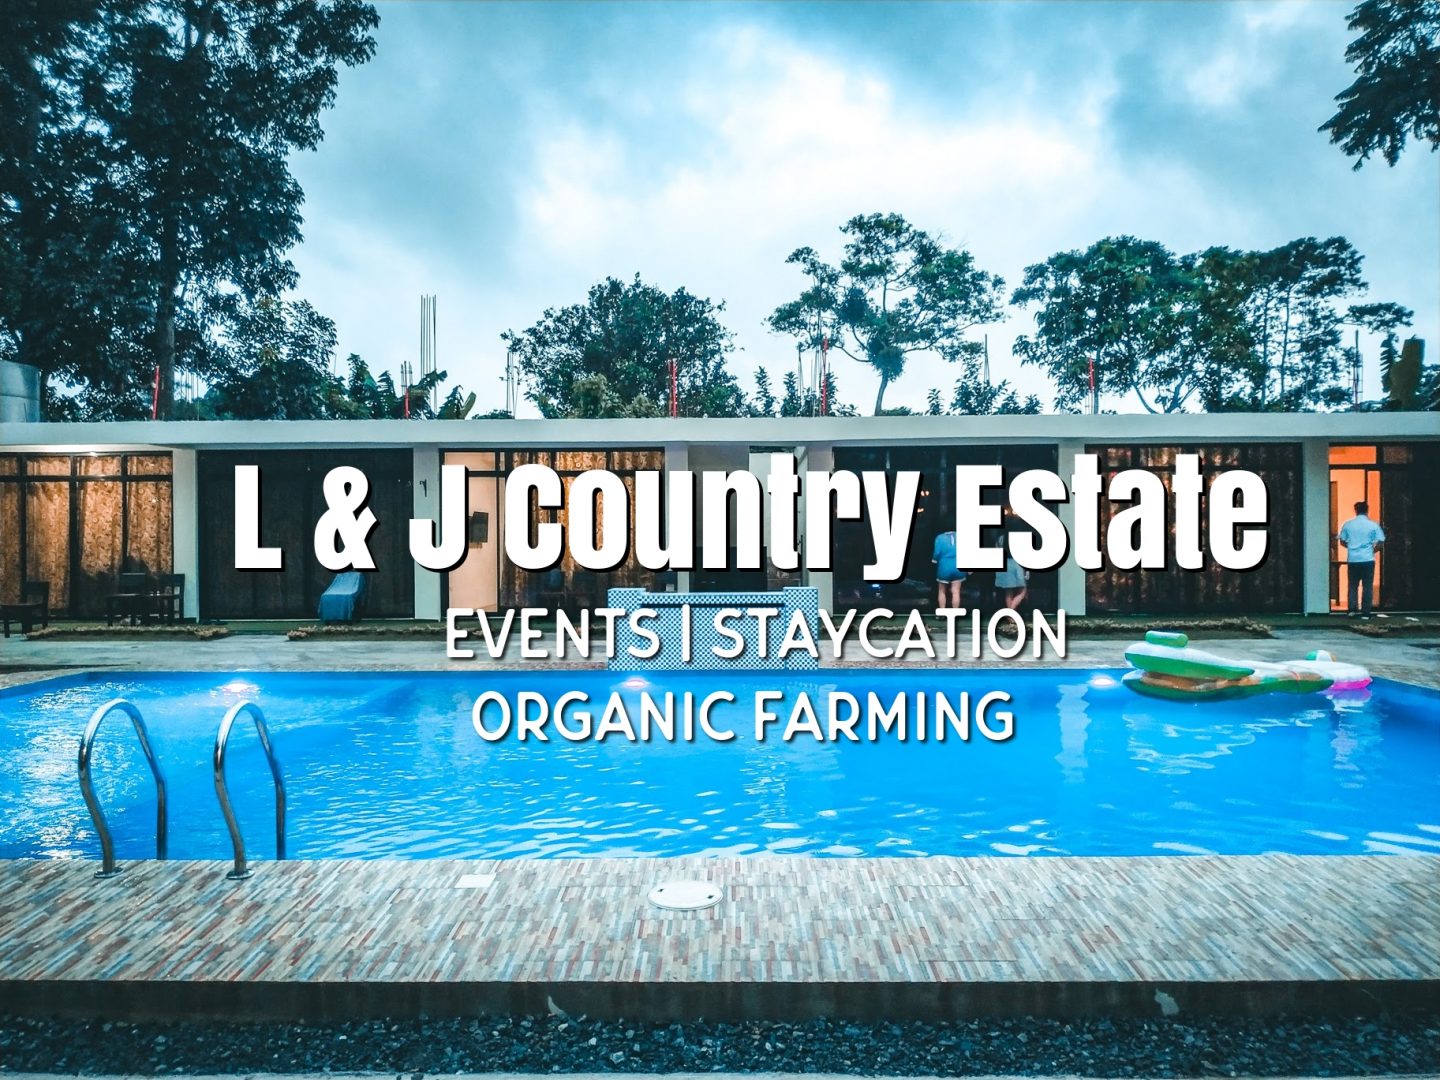 L & J Country Estate | Events, Staycation, and Organic Farming in Mendez, Cavite